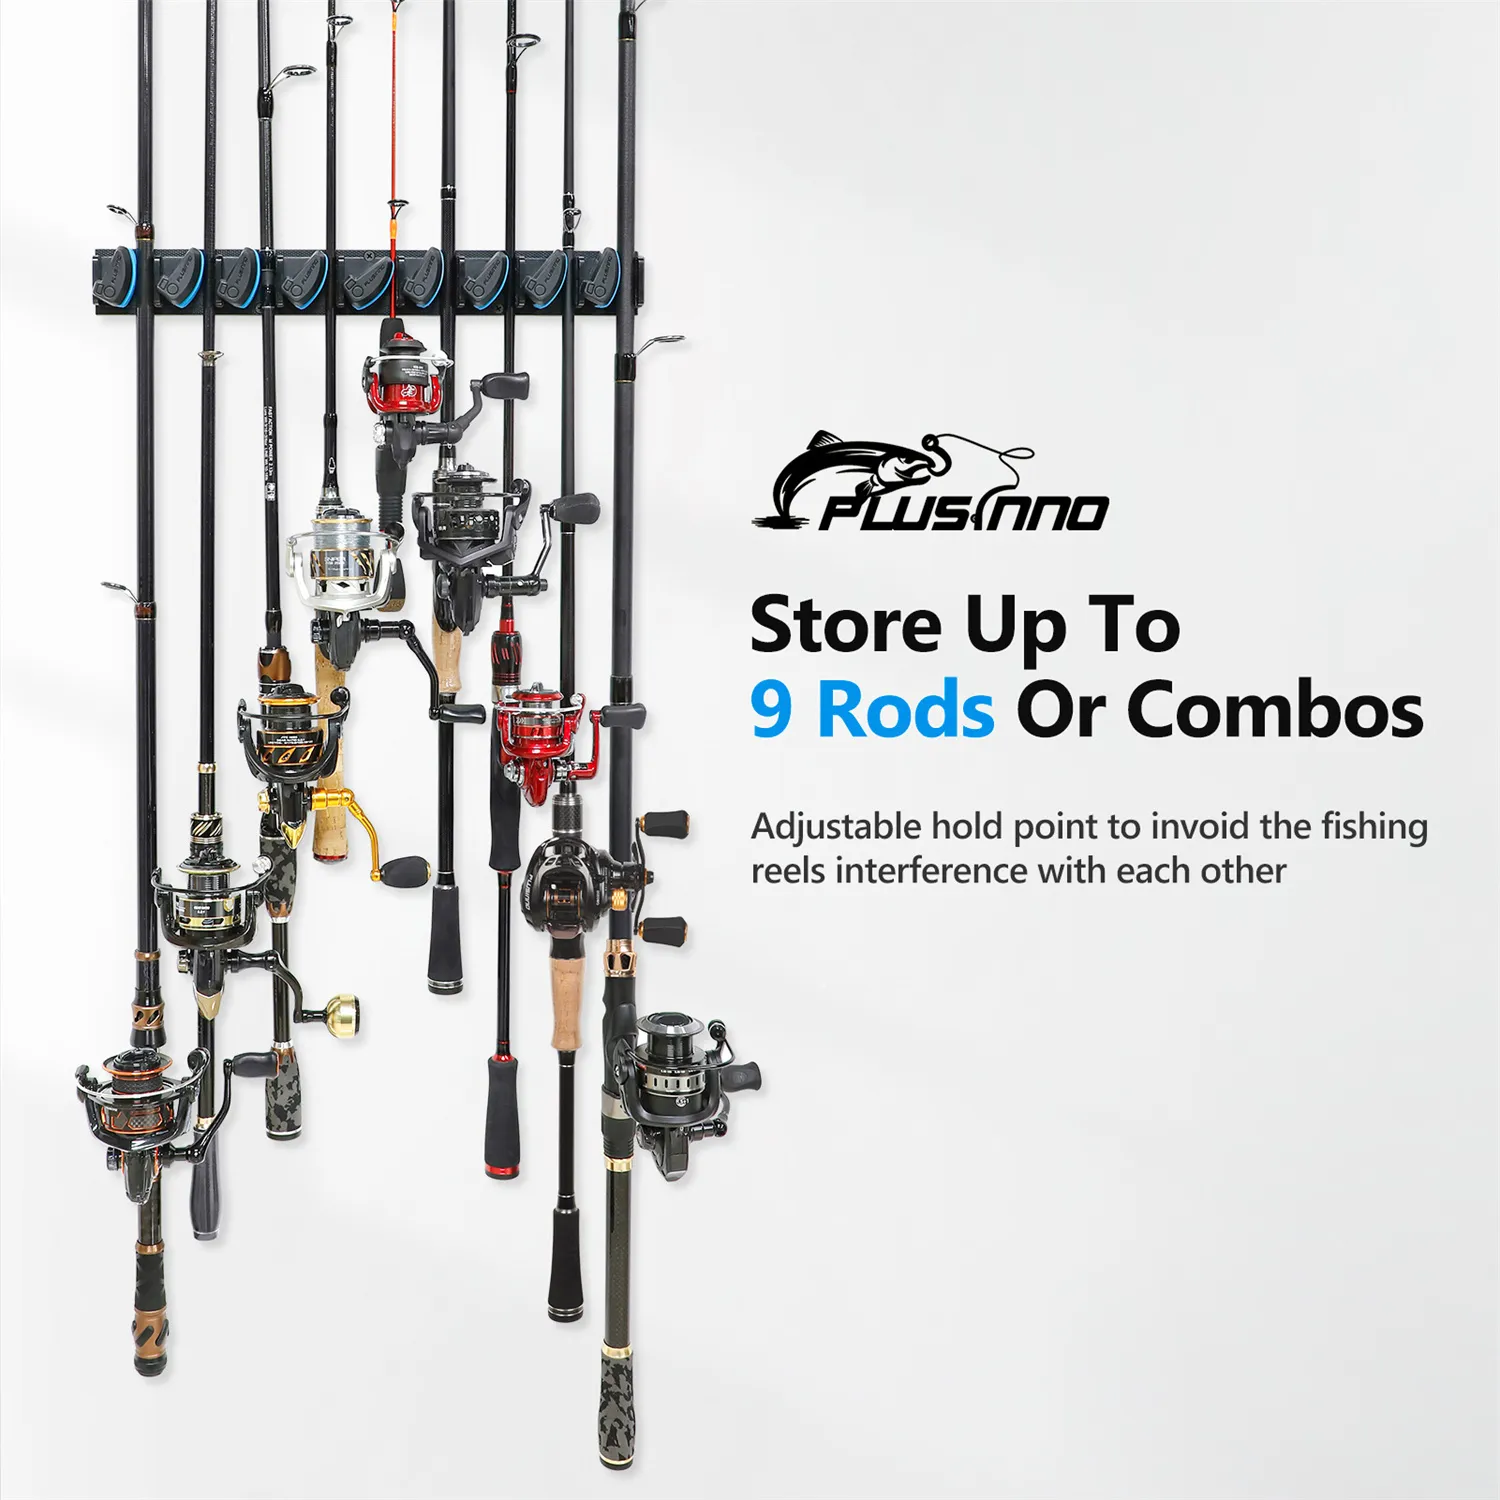 Fishing Accessories PLUSINNO Vertical Wall Mounted Fishing Rod Holder Pole  Rack Holds Up To 9 Rods Or Combos 230831 From Huan0009, $34.72